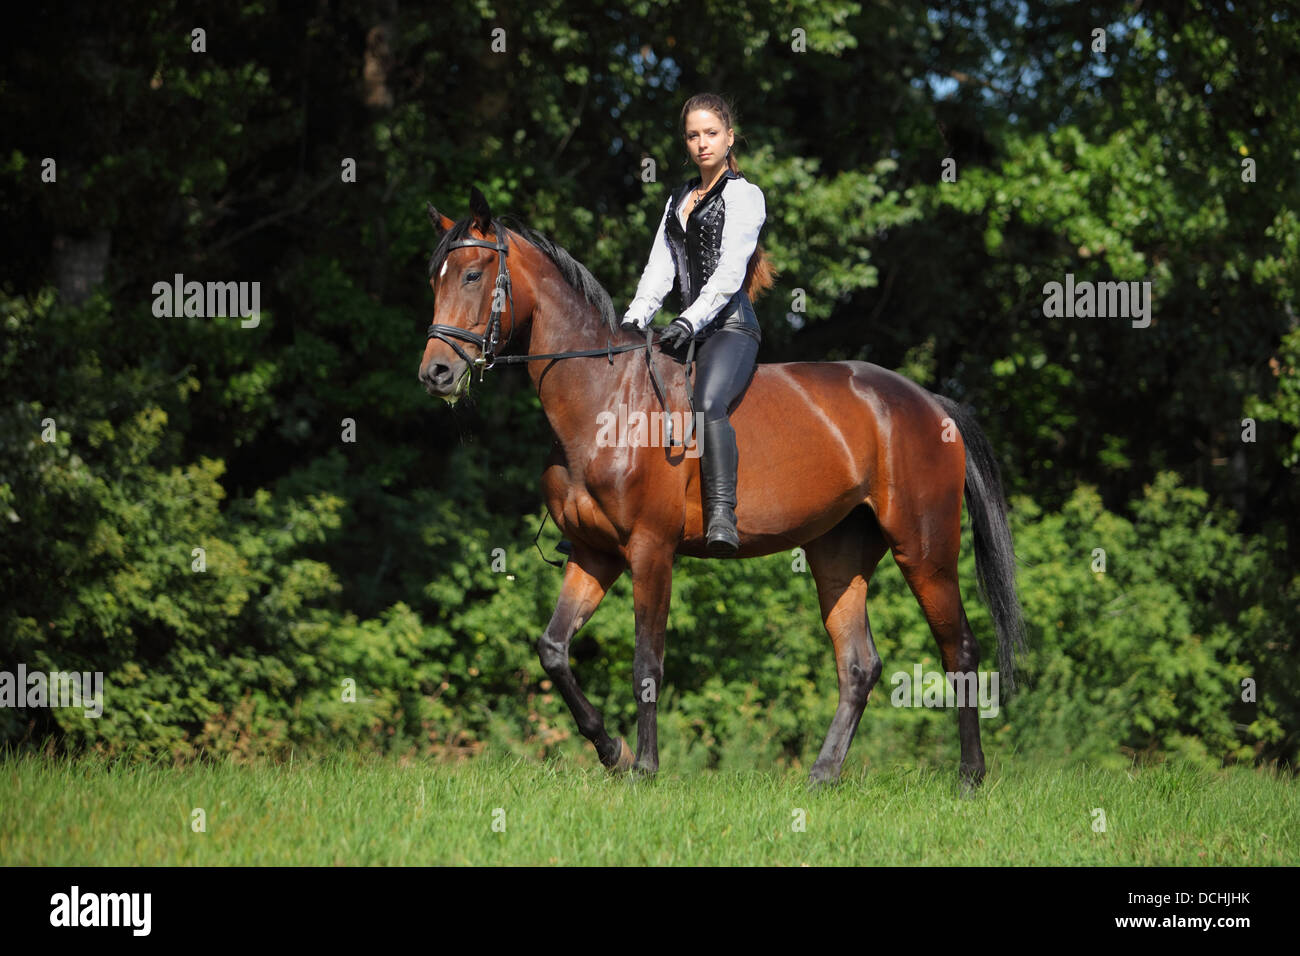 Portrait of young and pretty female unsaddle horse rider Stock Photo